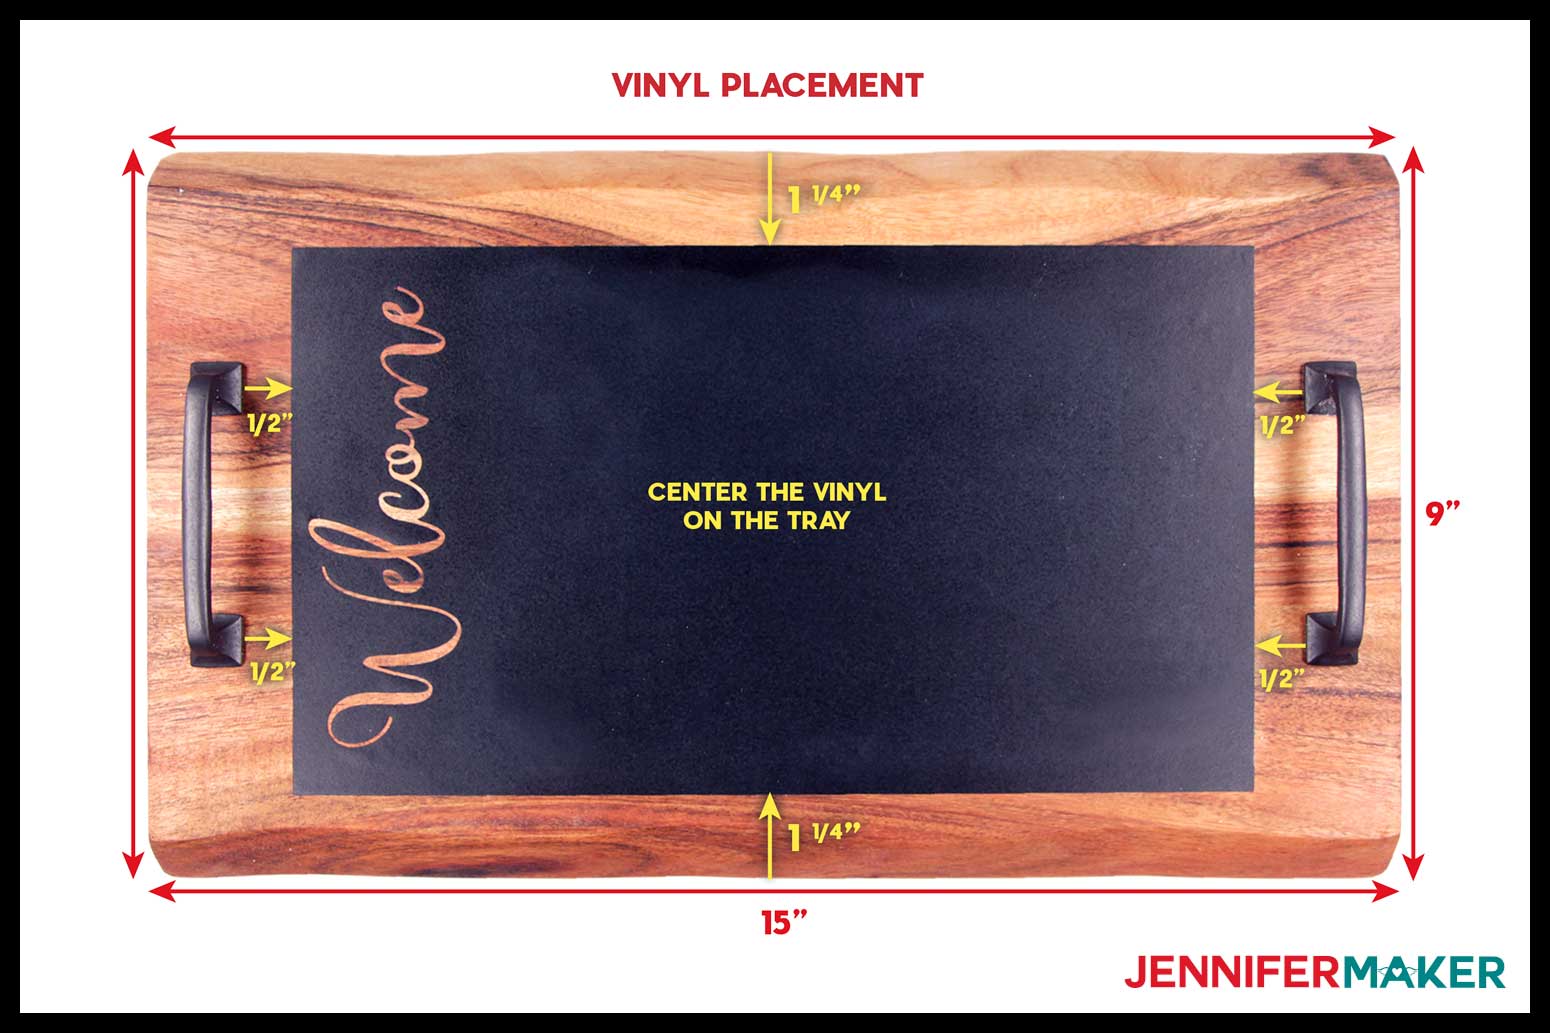 Guidelines for the Charcuterie Trays chalkboard vinyl placement